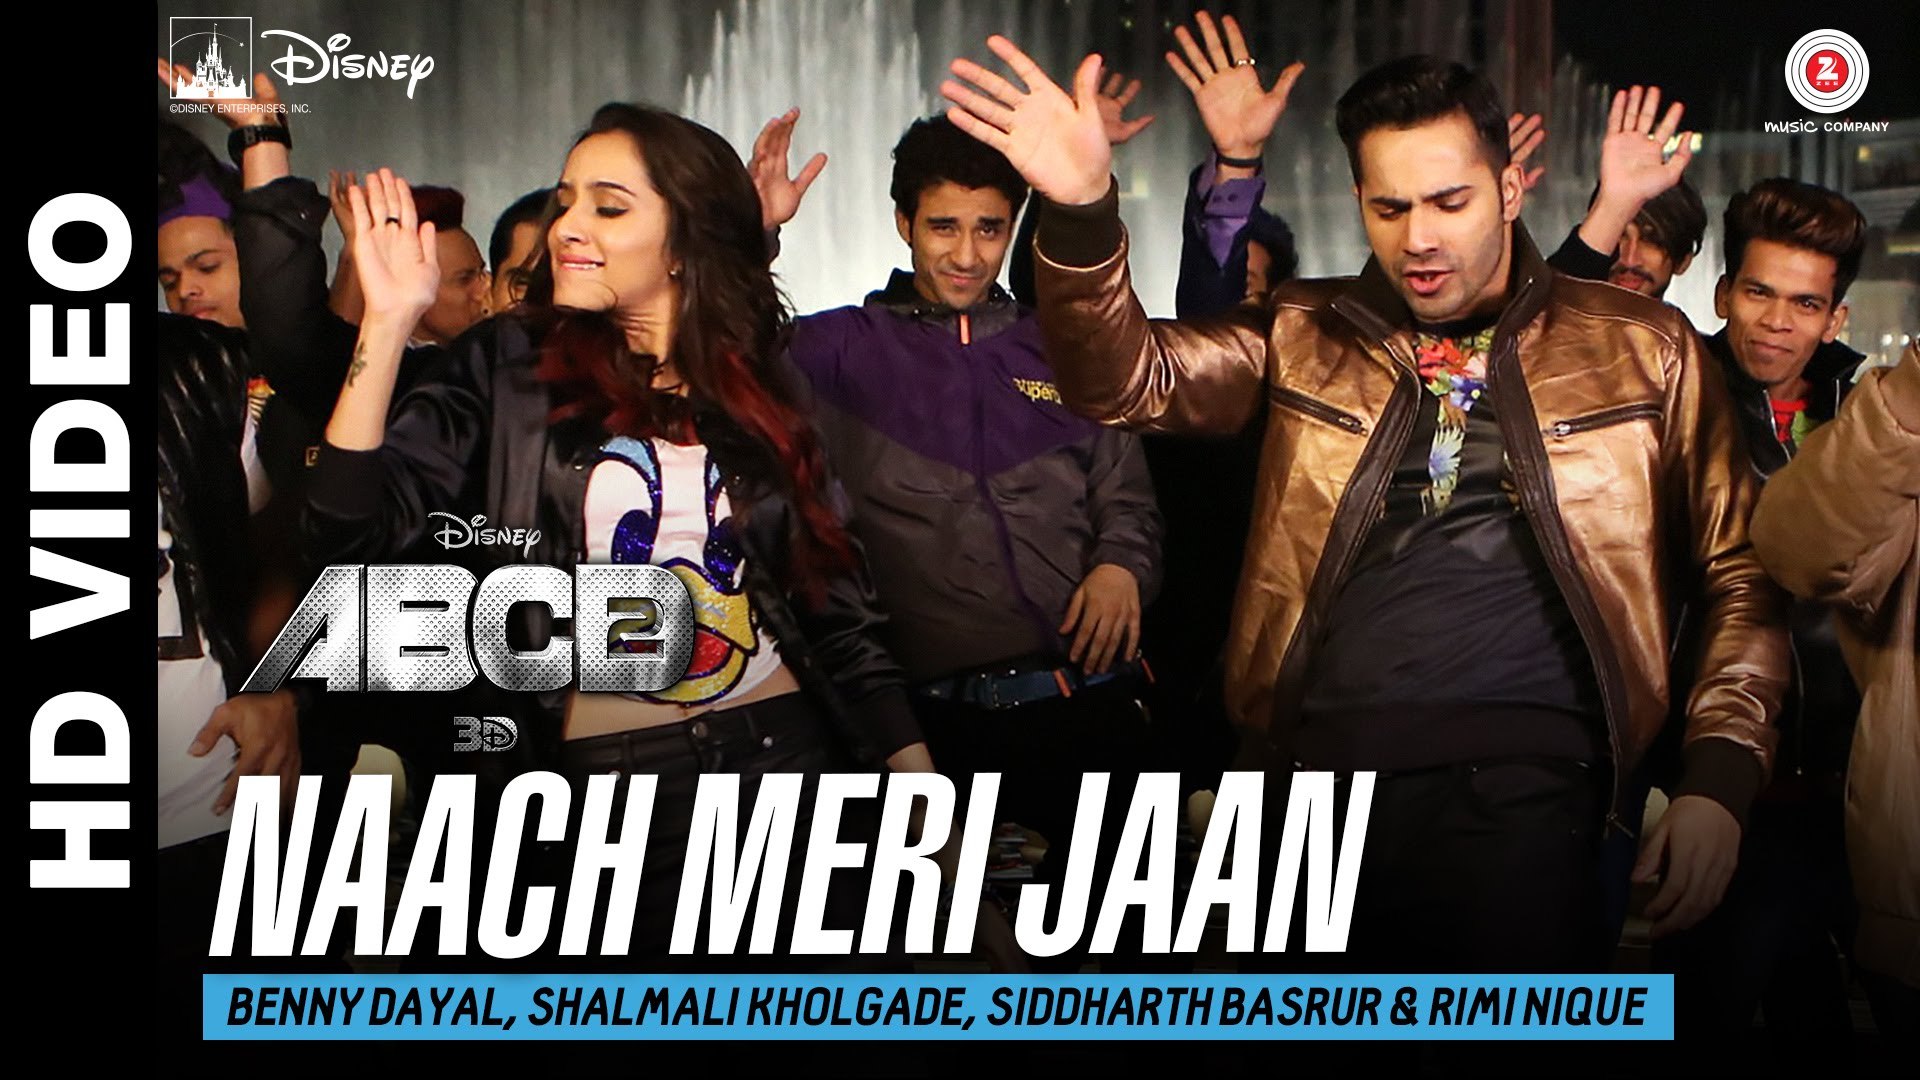 Naach Meri Jaan HD Video Song ABCD 2 [2015] - video Dailymotion